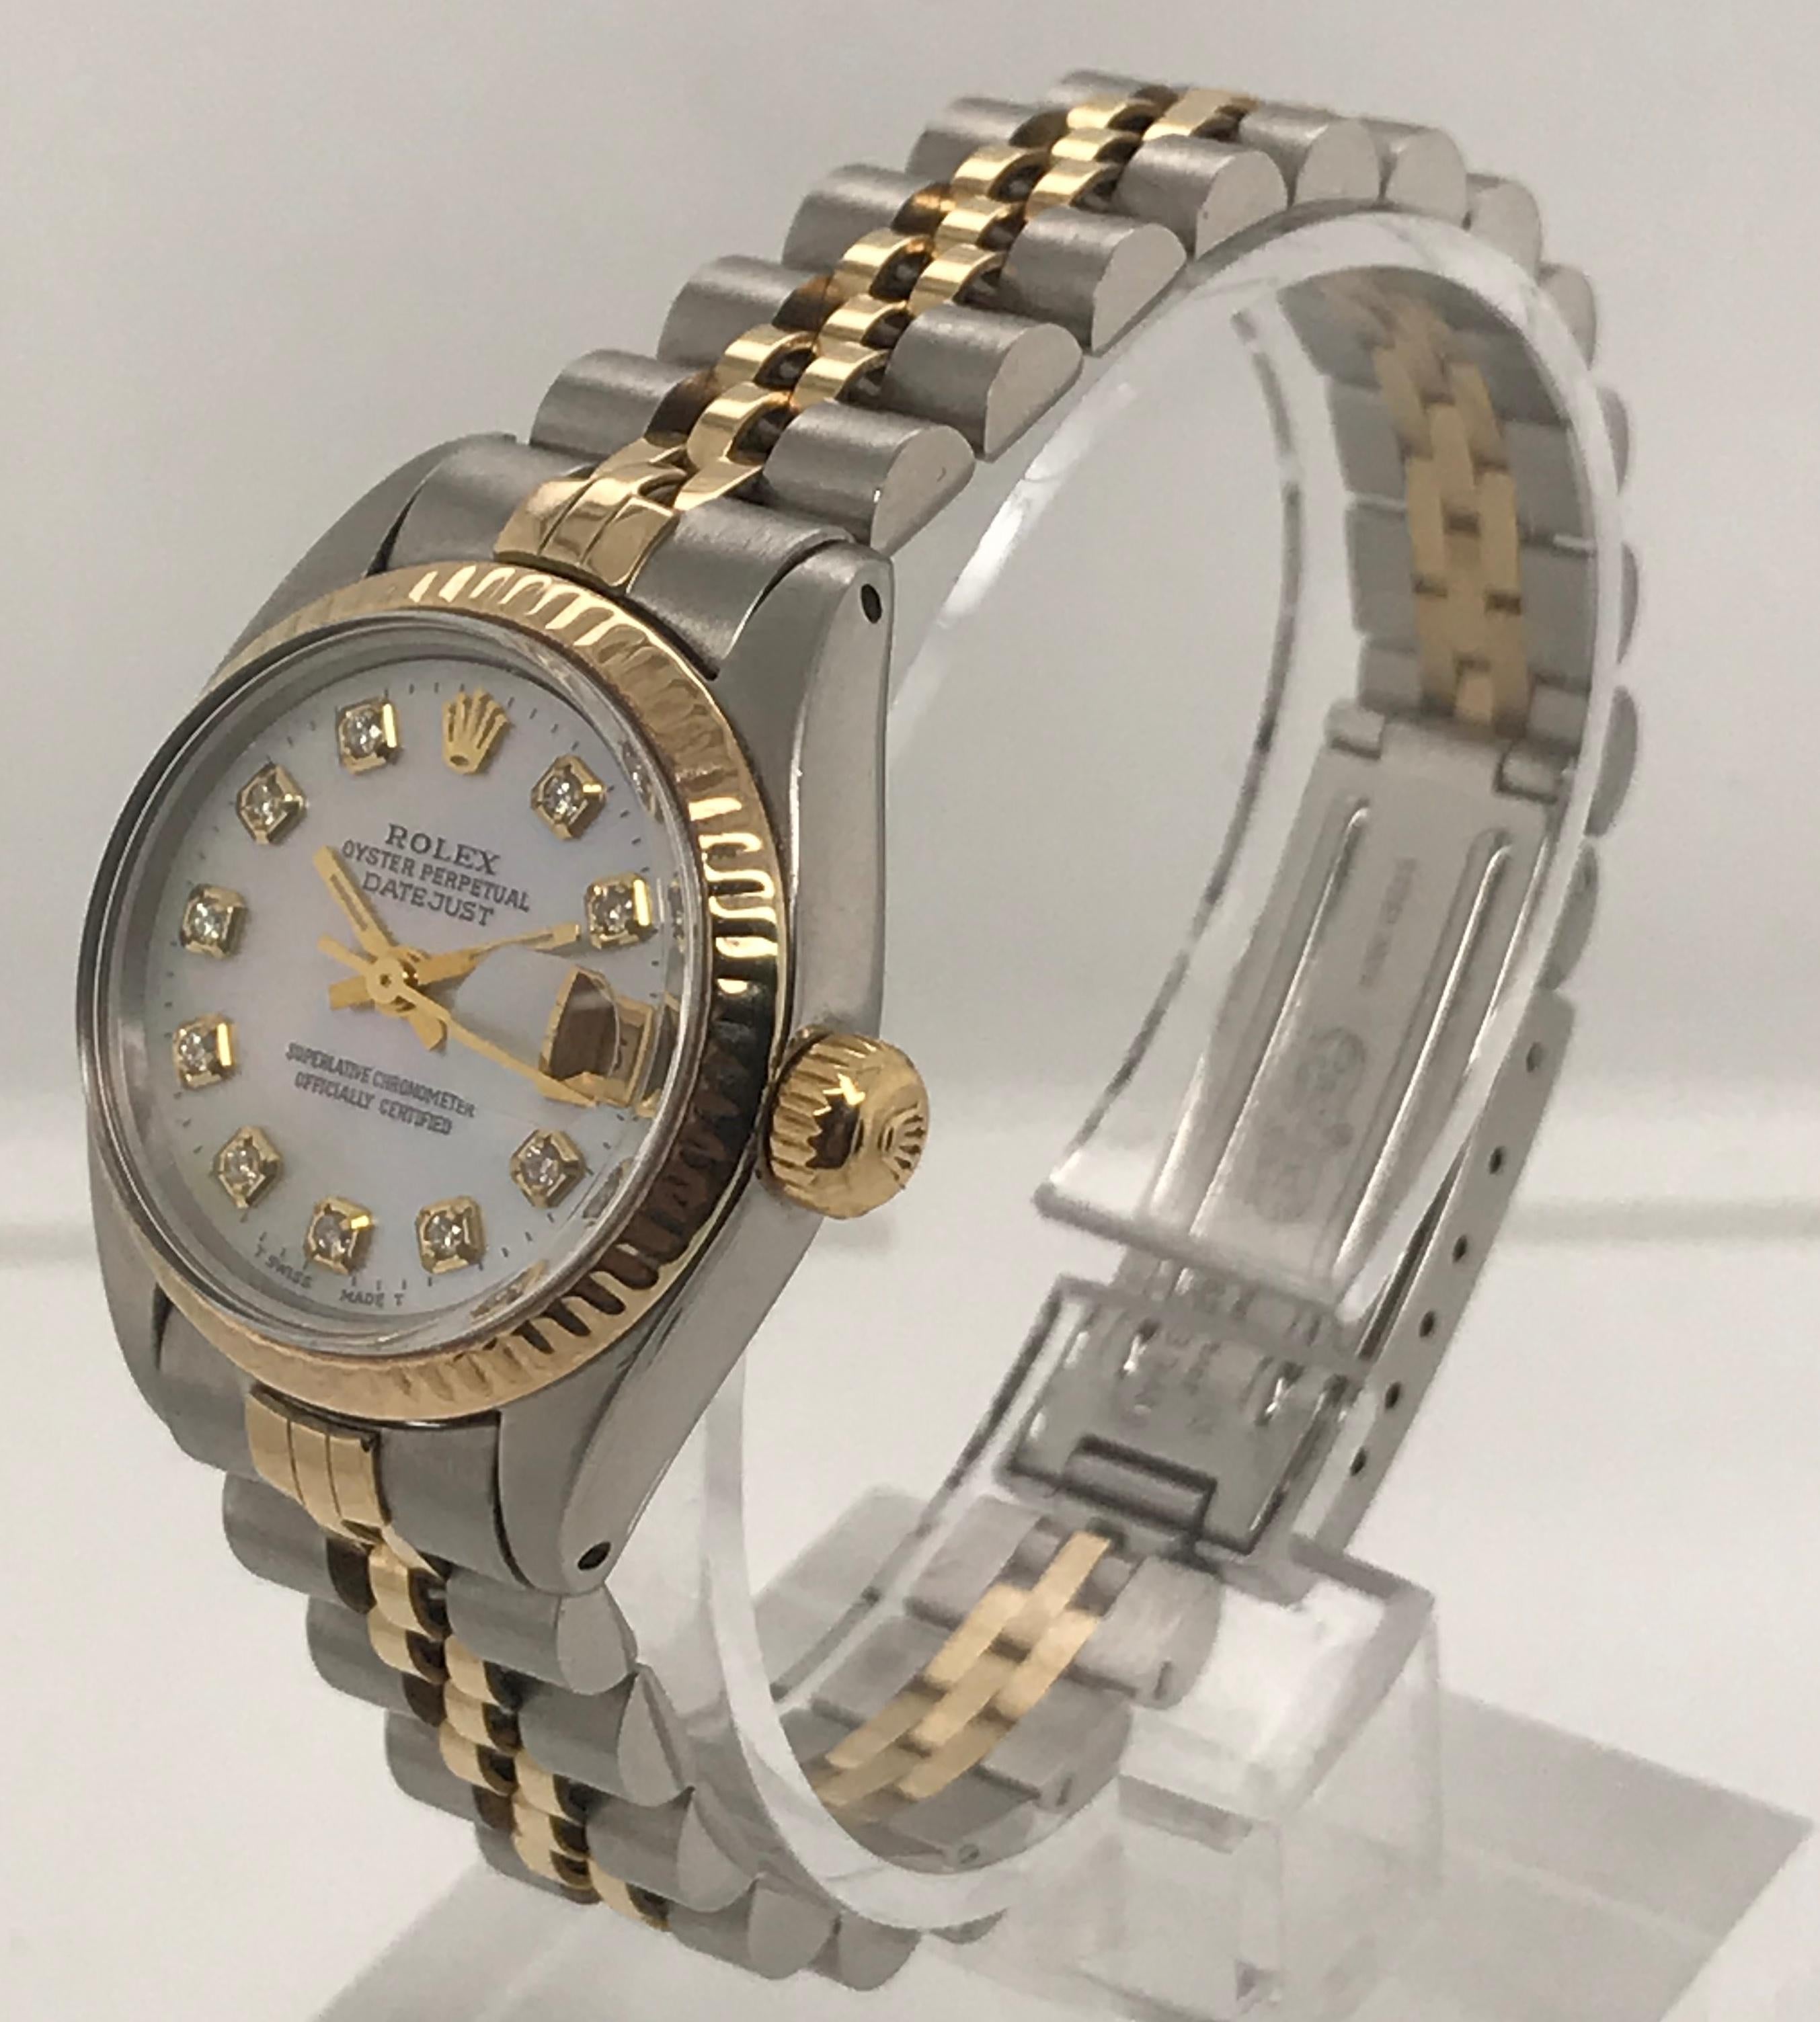 26mm Two Tone Ladies Rolex Datejust model with 18 karat yellow gold and Stainless Steel bracelet. Mother Pearl dial with Diamond accents. The bracelet is 18kt yellow gold and stainless steel with jubilee links.

Serial Number - 7*******

Model